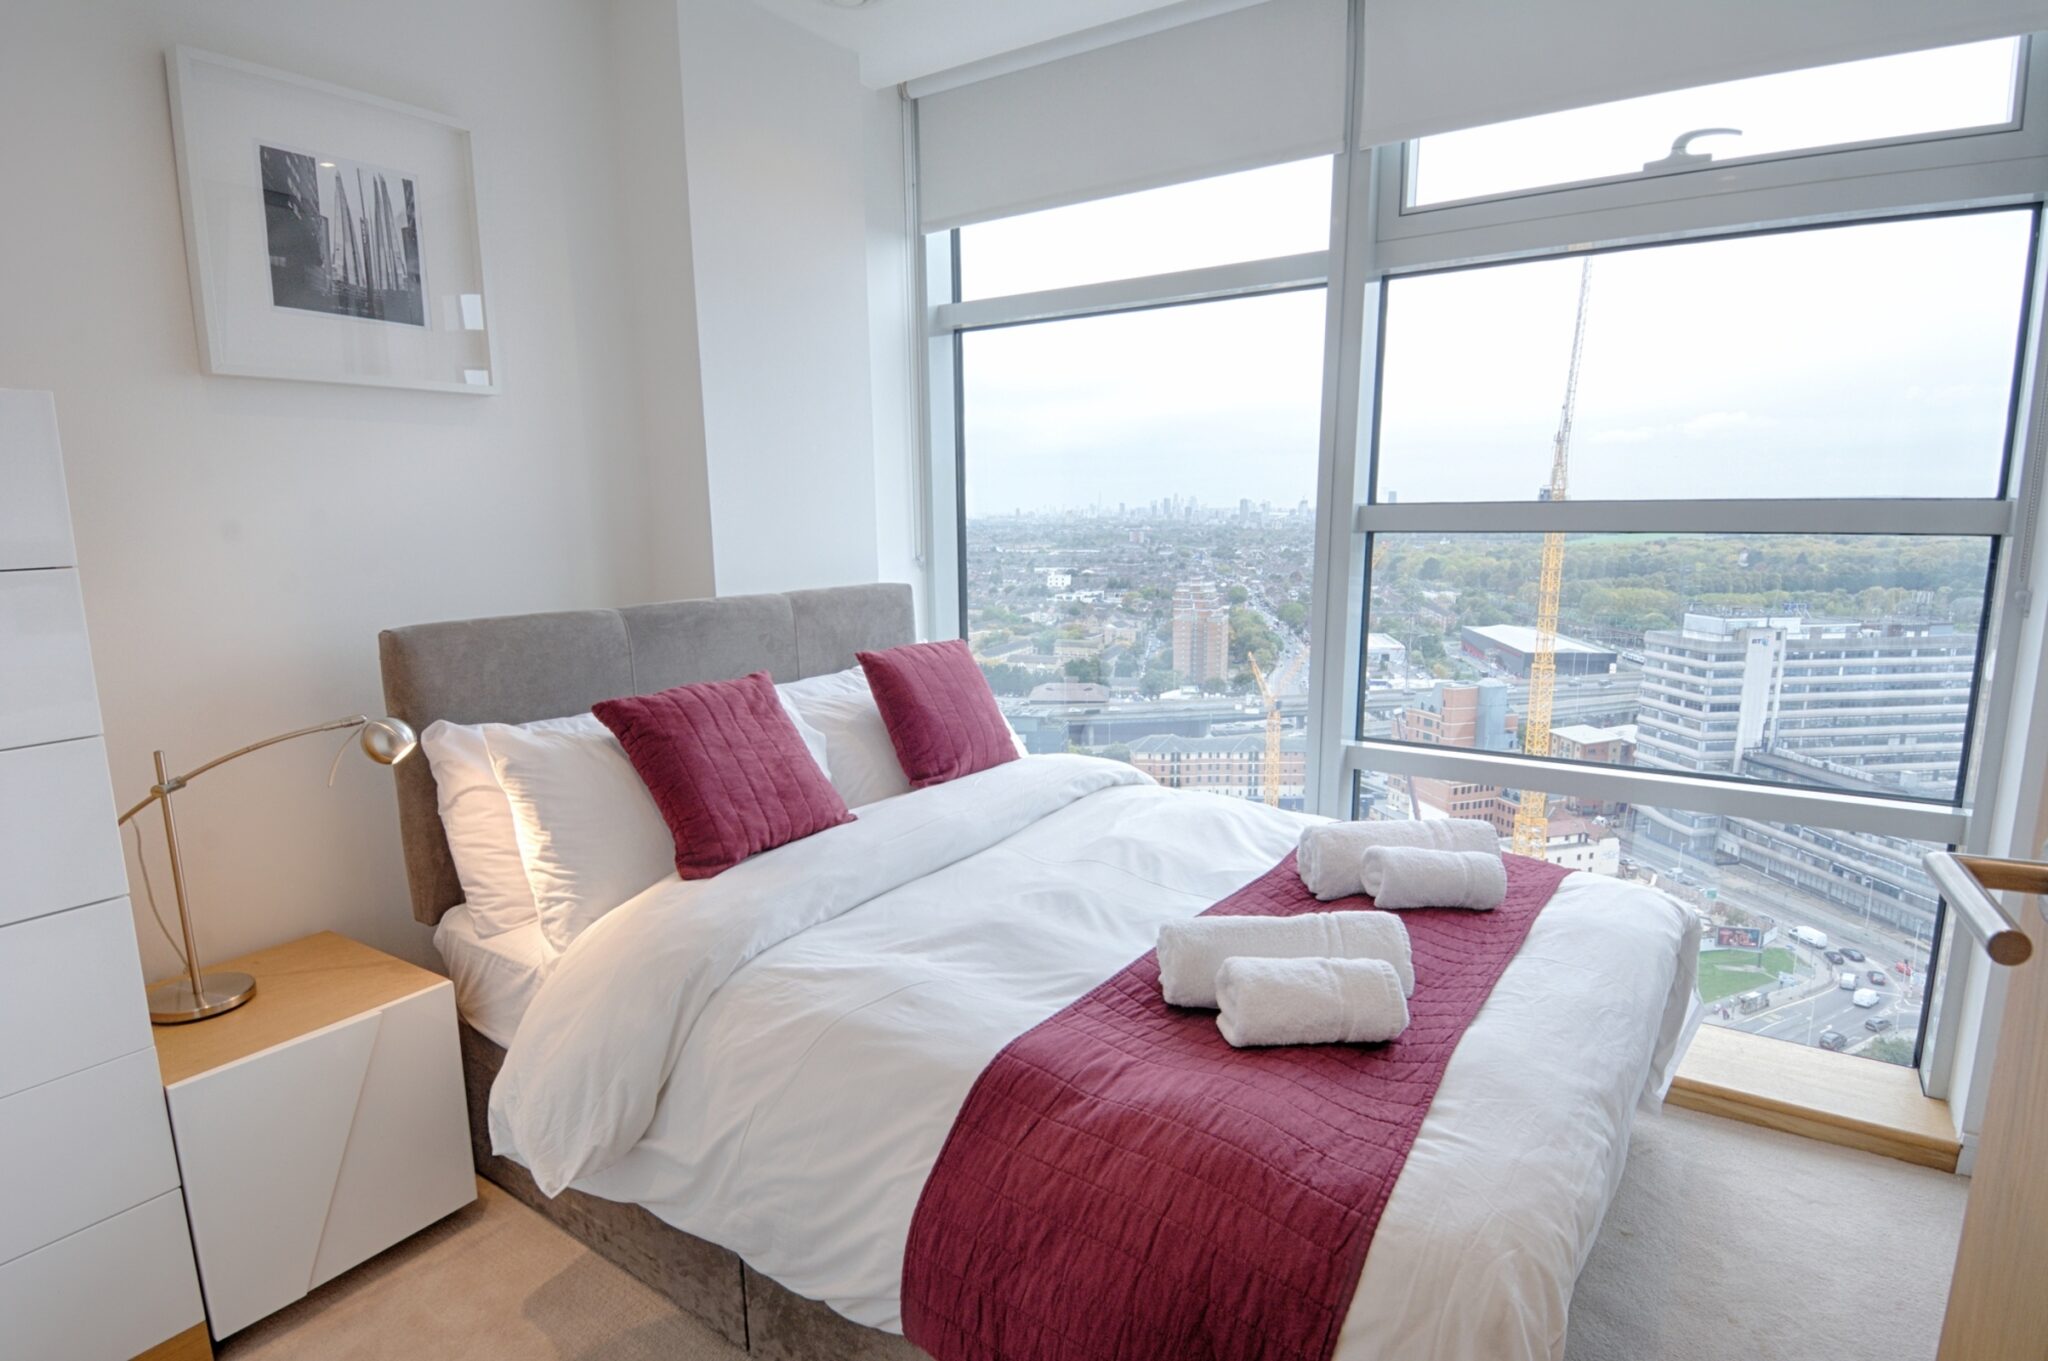 Serviced Accommodation In Ilford offer fully equipped kitchens, free Wi-Fi, housekeeping, and flexible stay options for a comfortable Stay. Book Now !